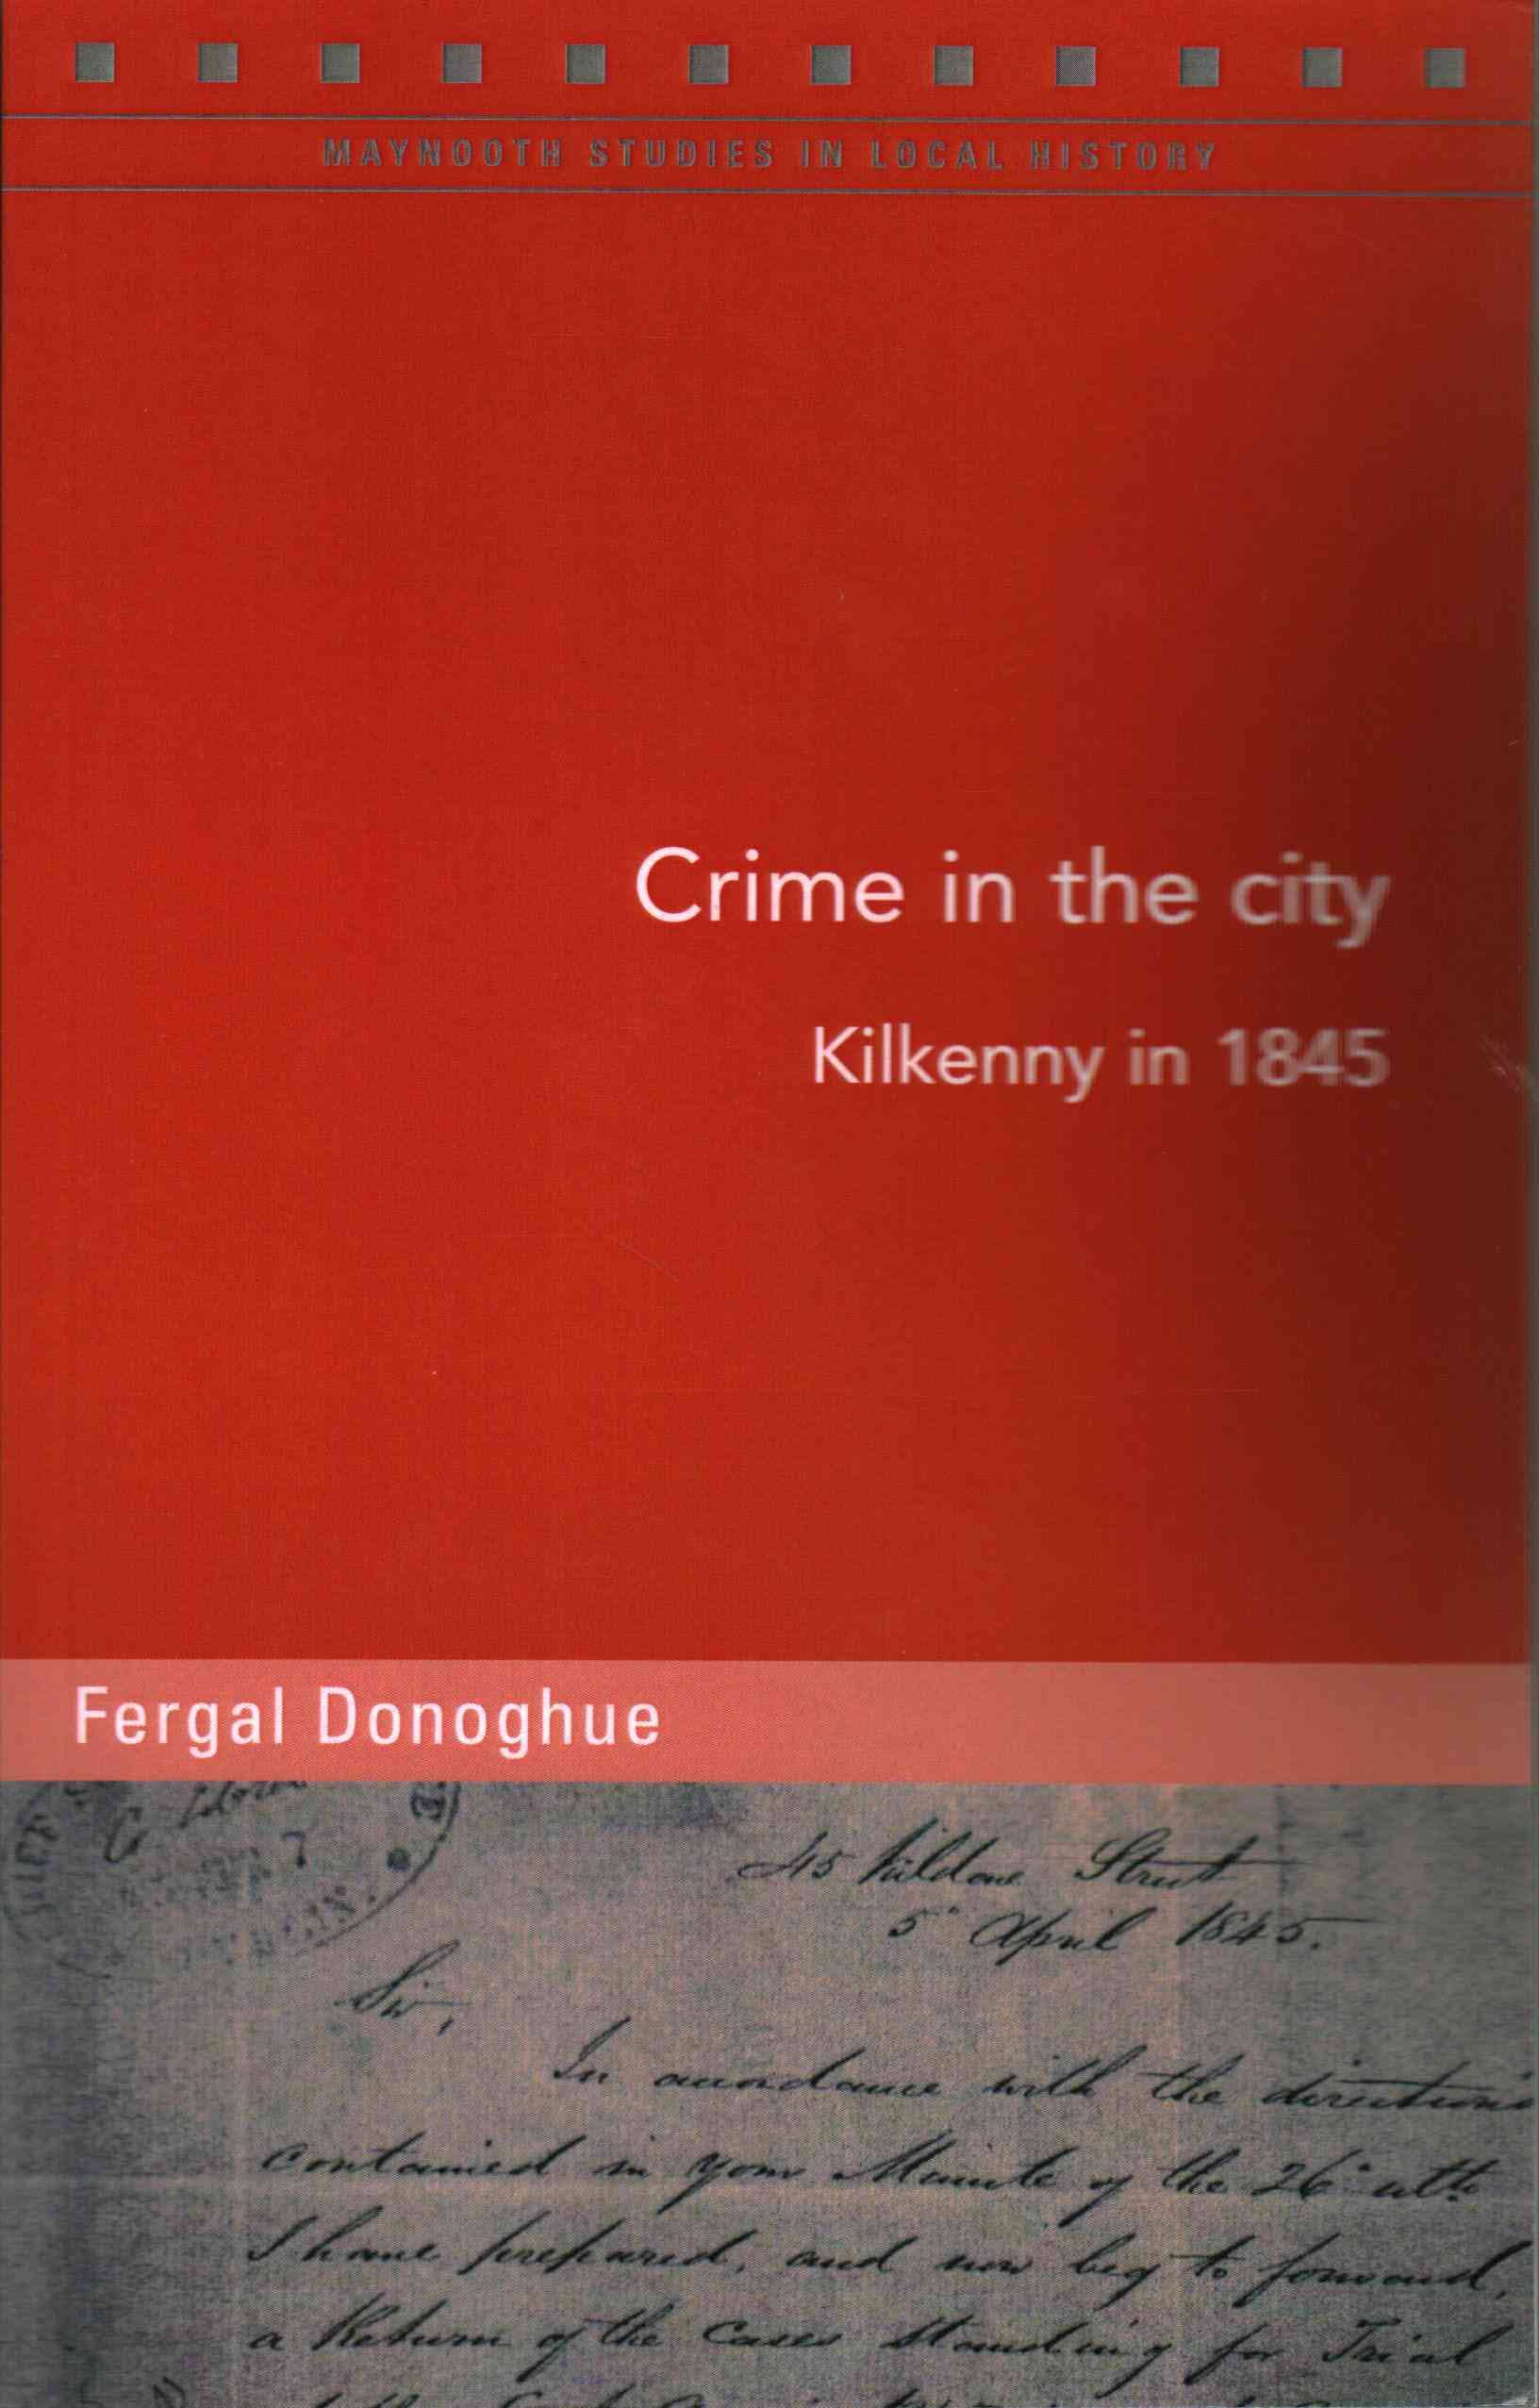 Crime in the City: Kilkenny in 1845  (Maynooth Studies in Local History)